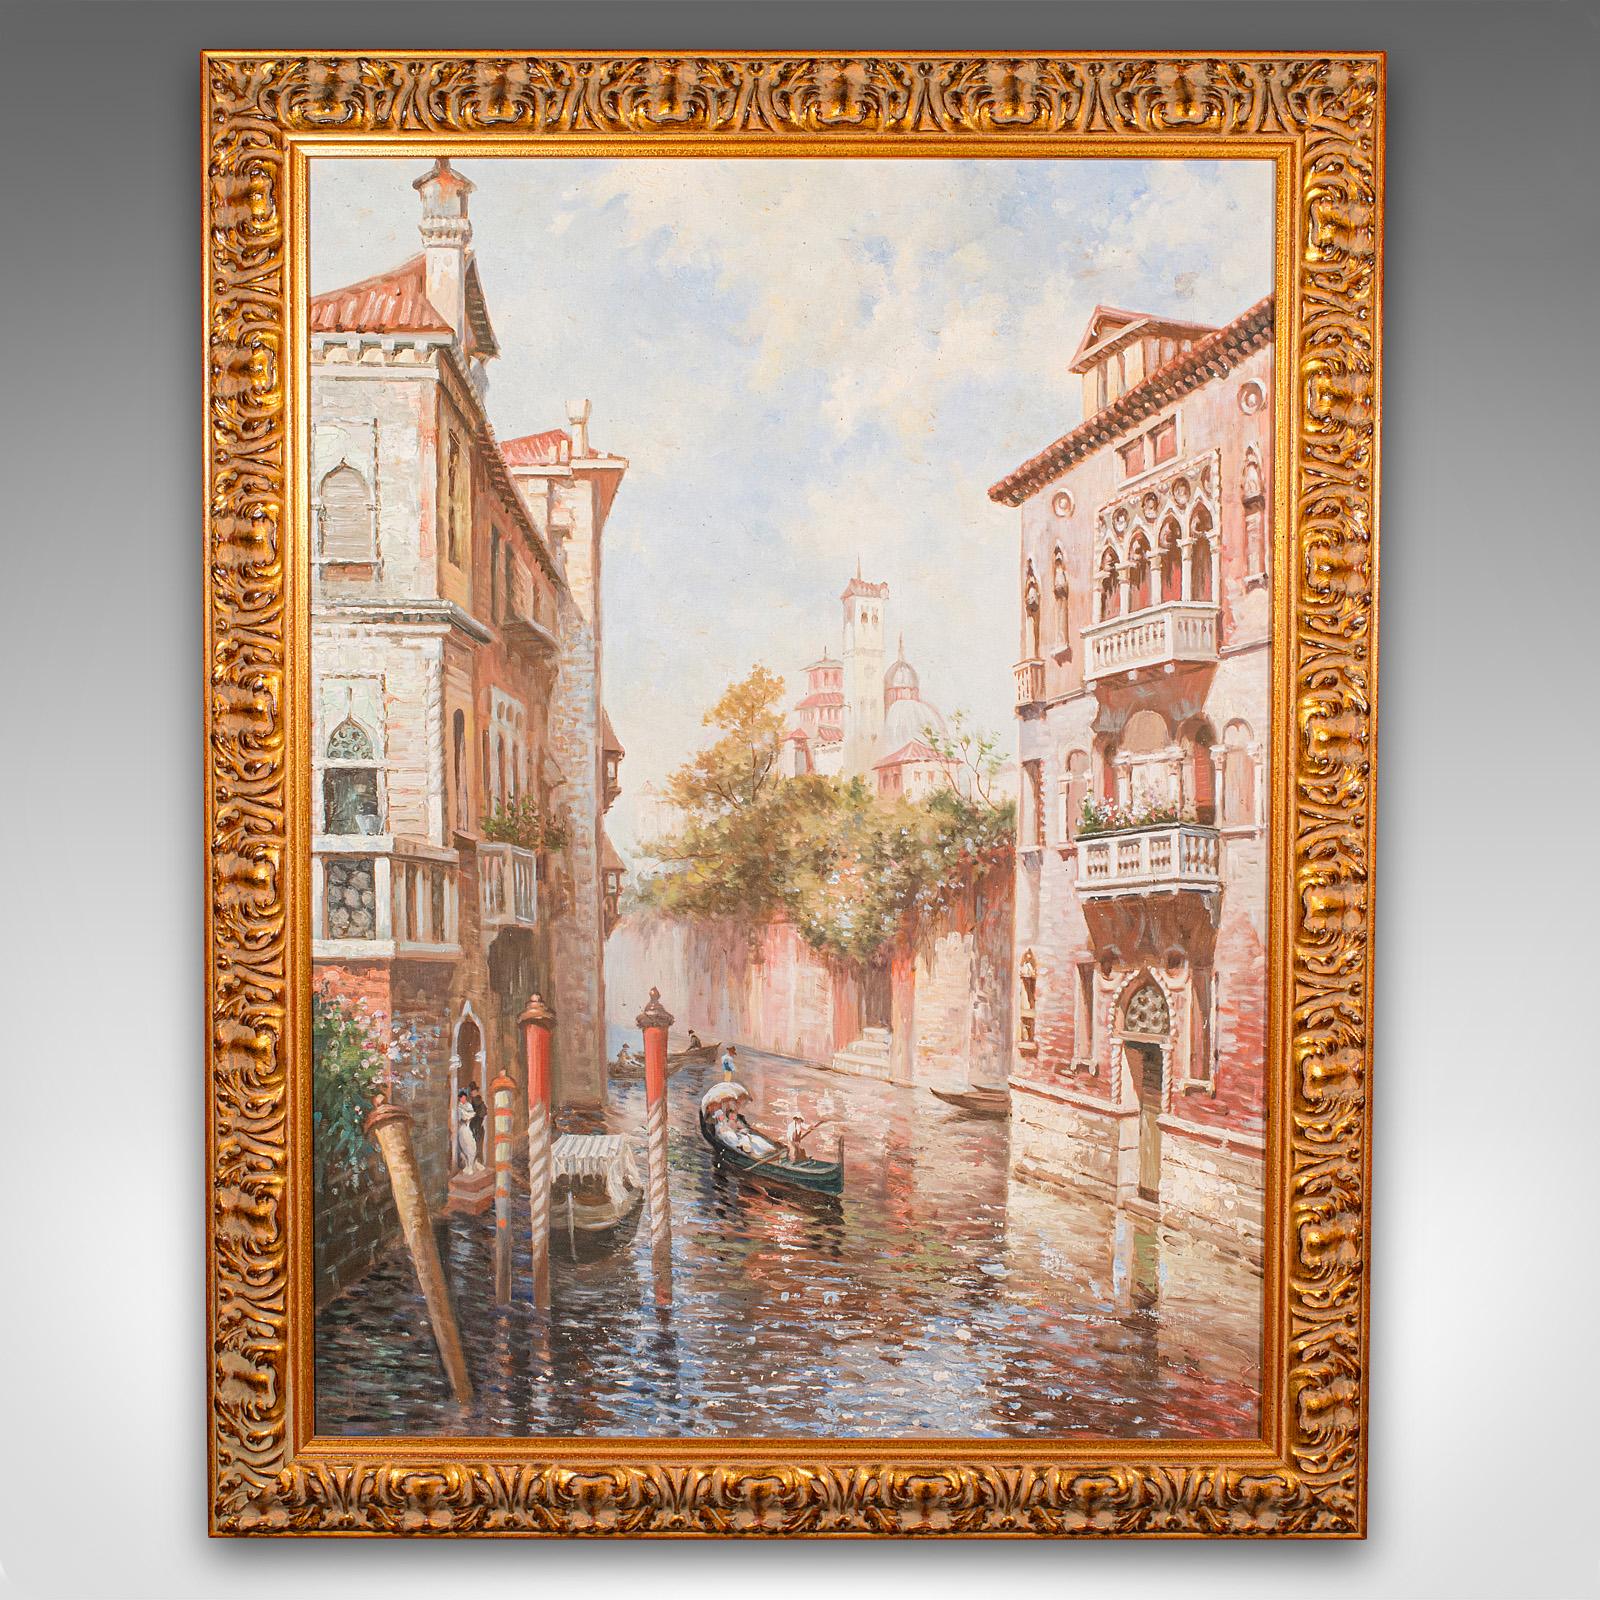 This is a large vintage Venetian painting. A Continental, oil on canvas study of Venice, dating to the late 20th century, circa 1980.

A Venetian treat - captured in wonderful colour and presented in a fine frame
Displays a desirable aged patina and